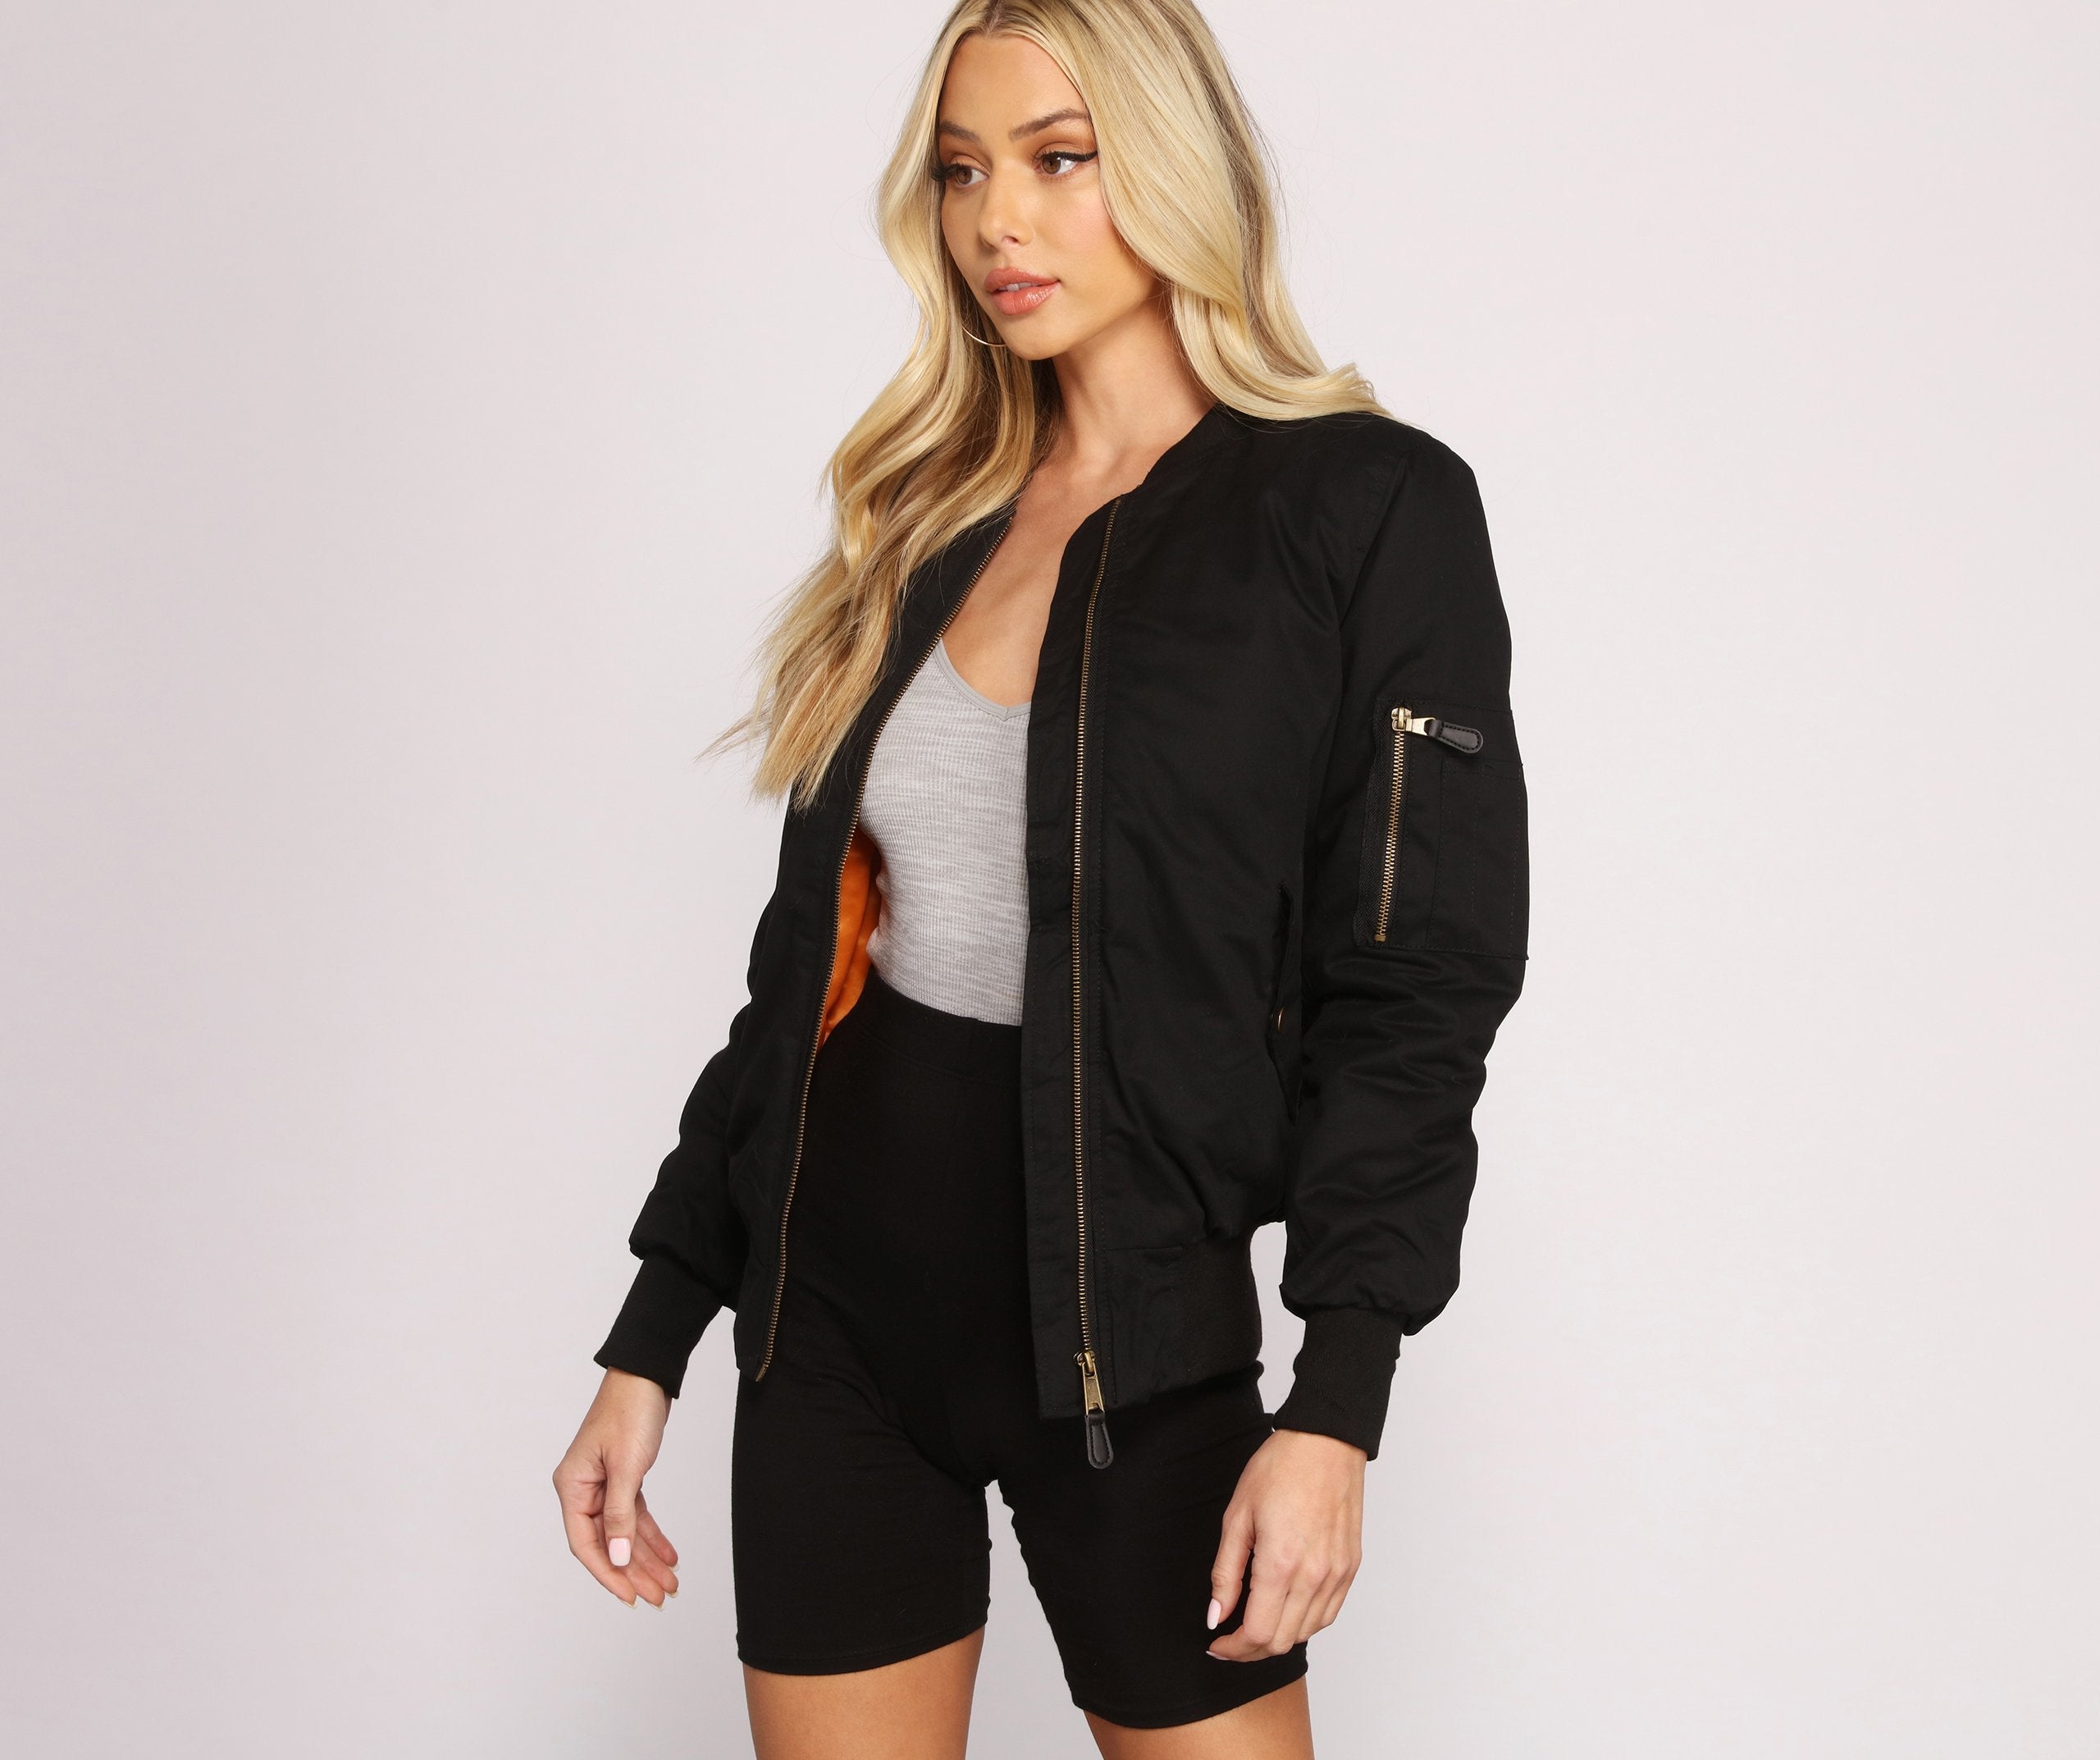 Edgy Chic Bomber Jacket - Lady Occasions